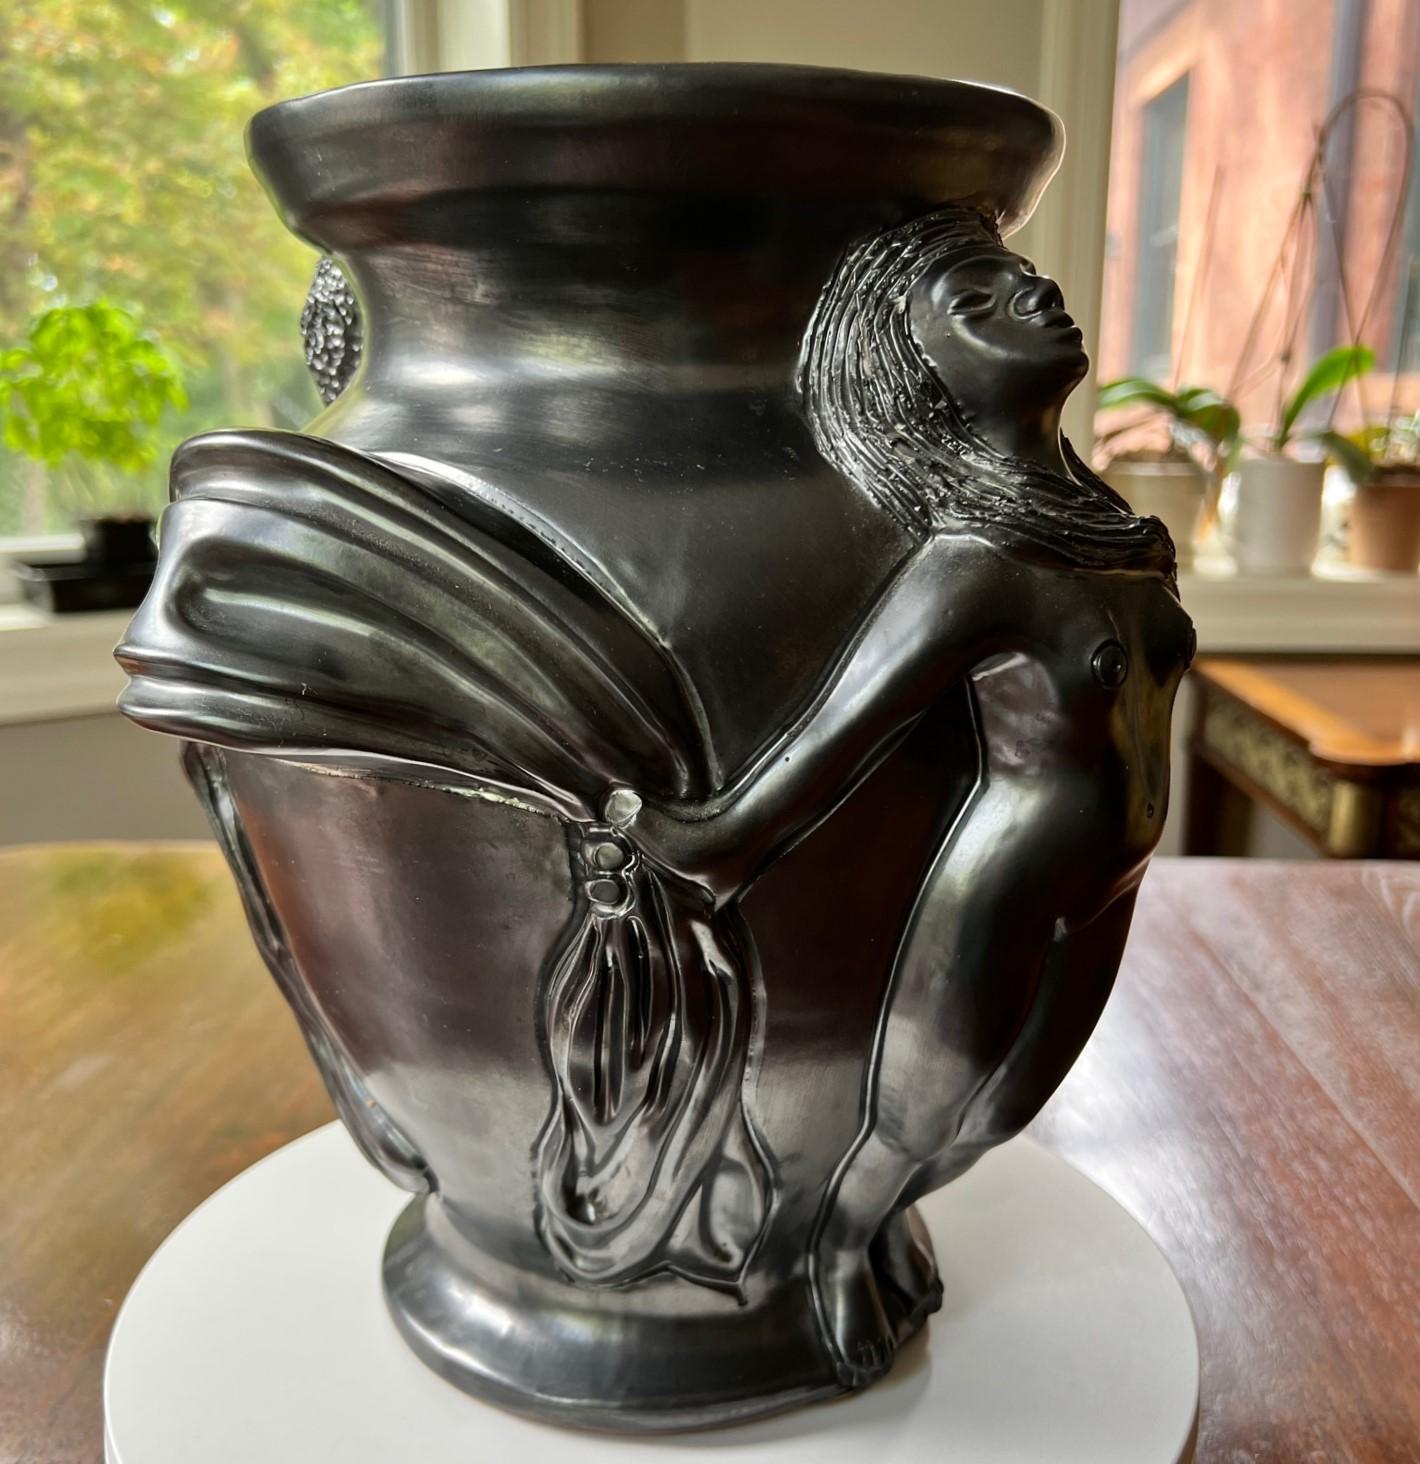 Jean Marais (French 1913-1998), a black lustre glazed terracotta vase of nudes holding draped scarves, c.1960, signed 'Jean Marais'. 

Included in the sale is a hardcover copy of L'Oeuvre Plastique including portraits of Cocteau, Genet, et al,